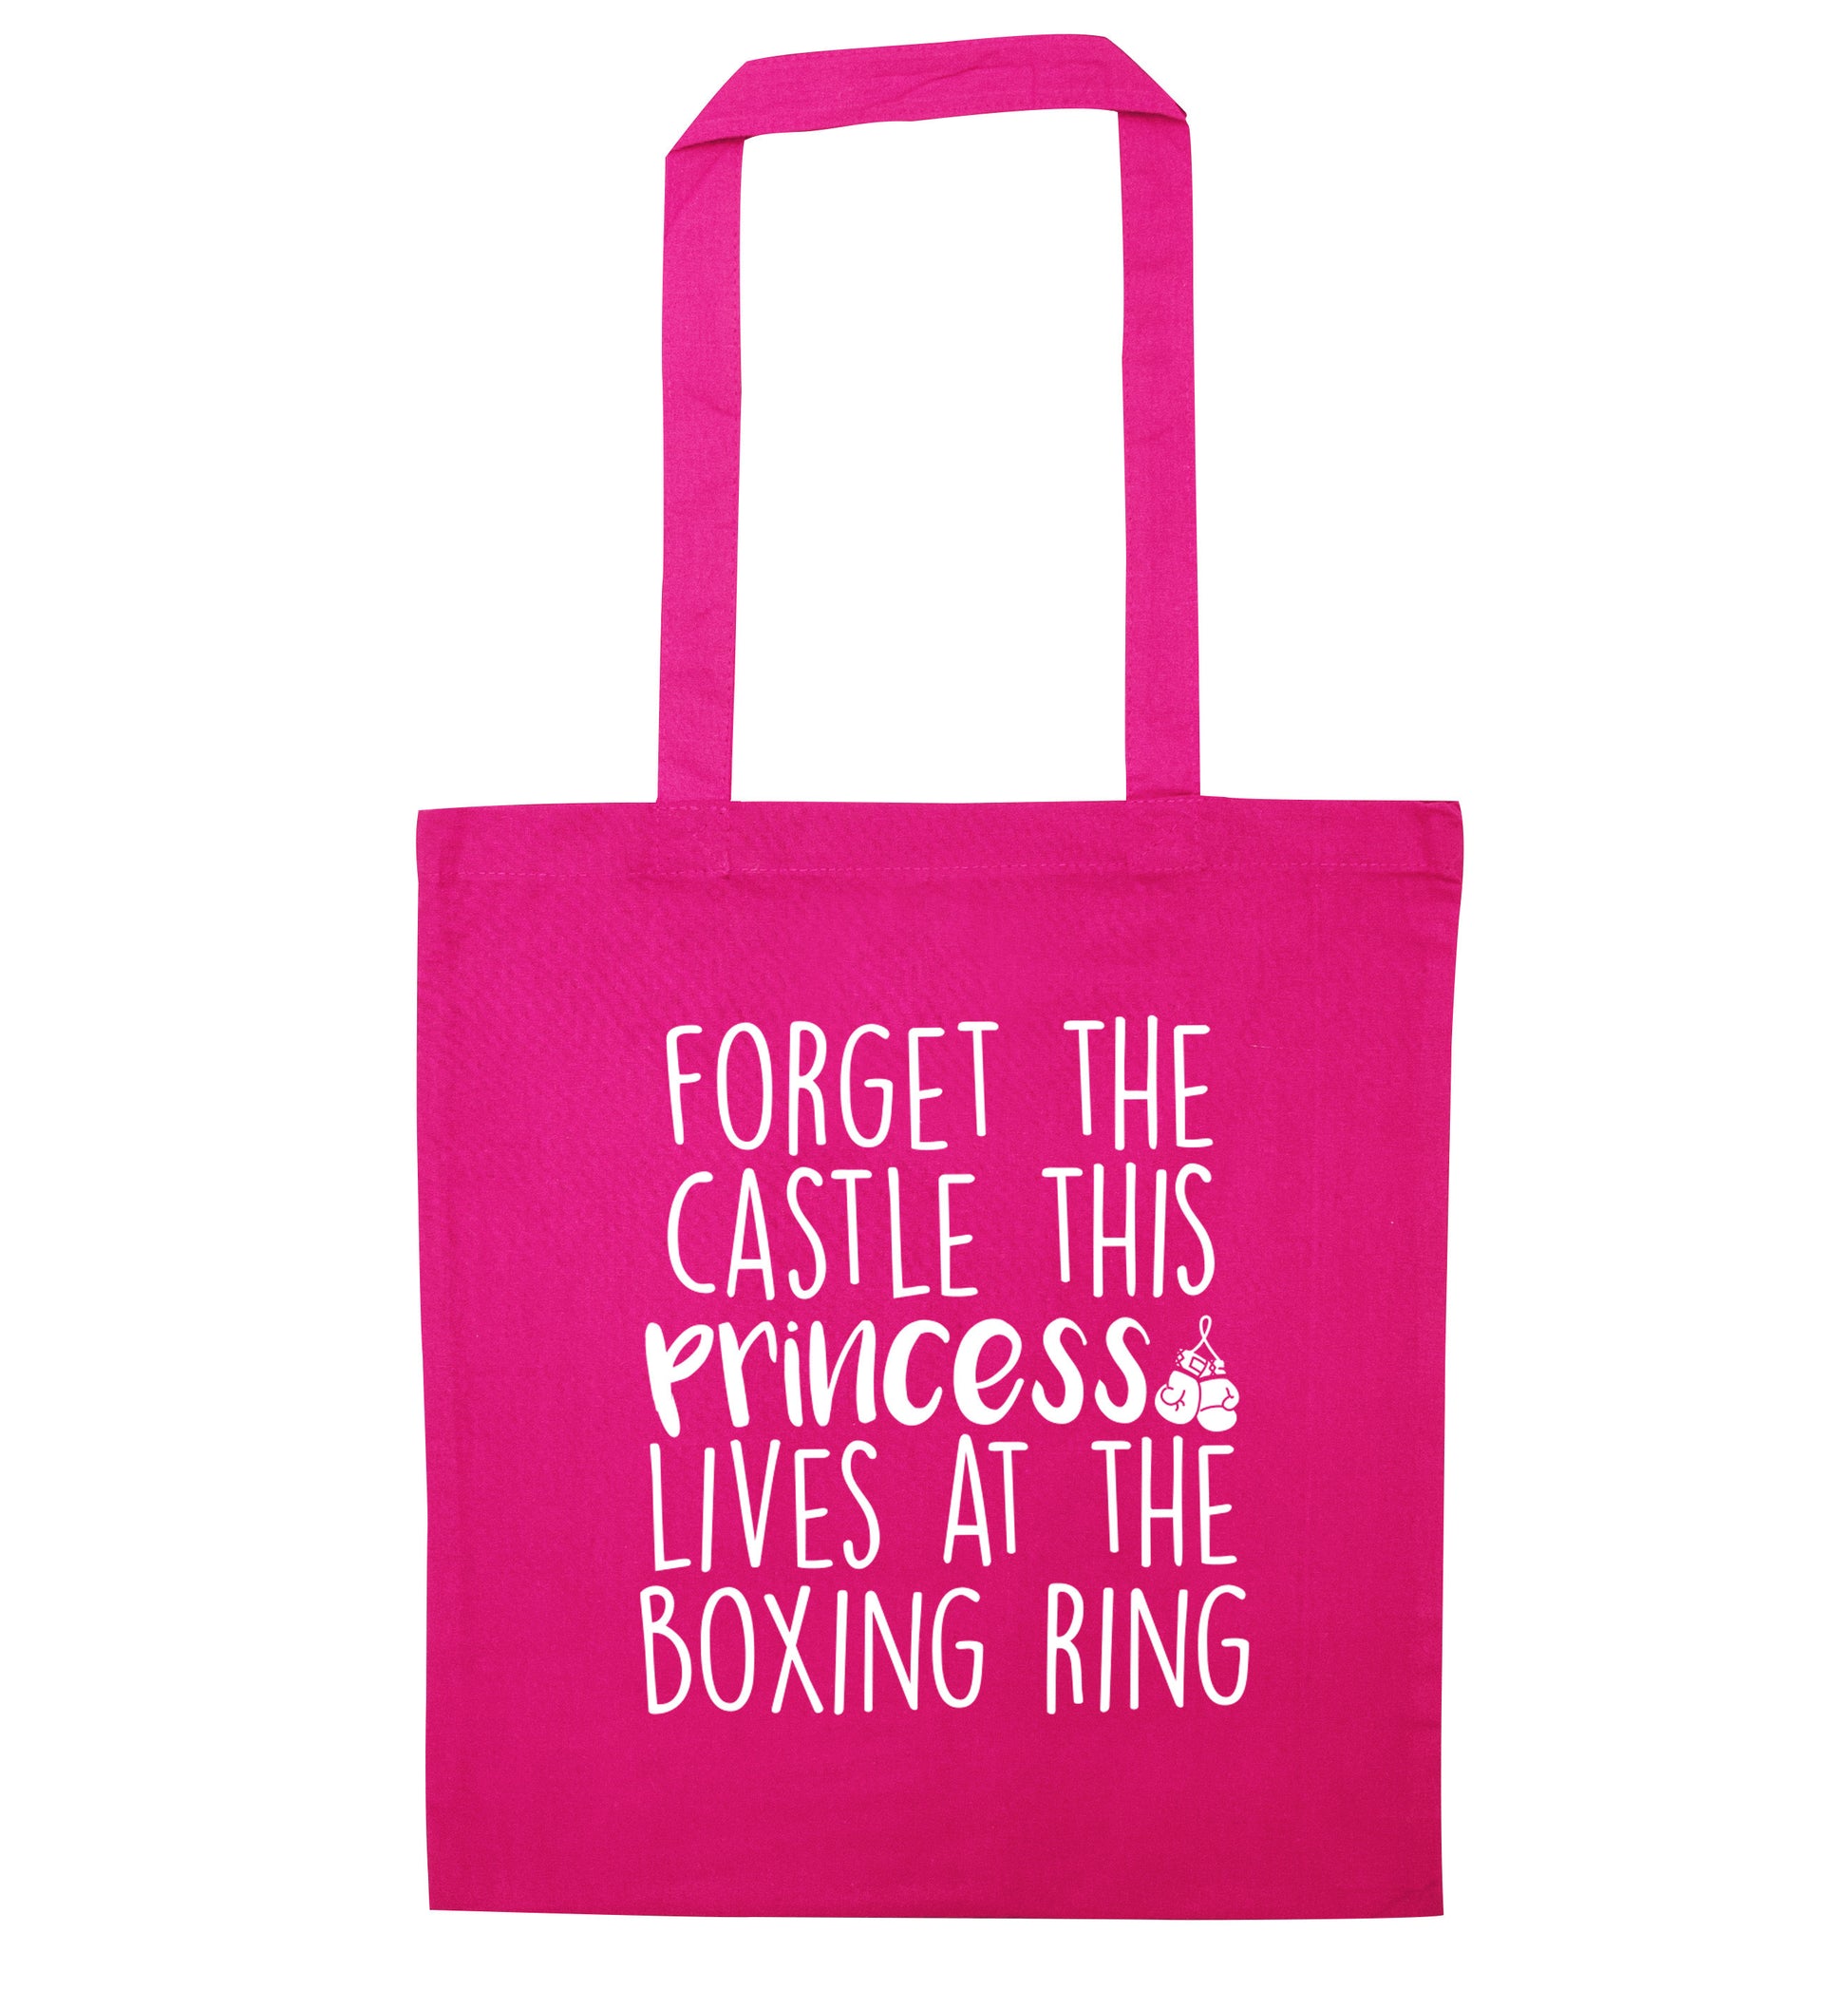 Forget the castle this princess lives at the boxing ring pink tote bag